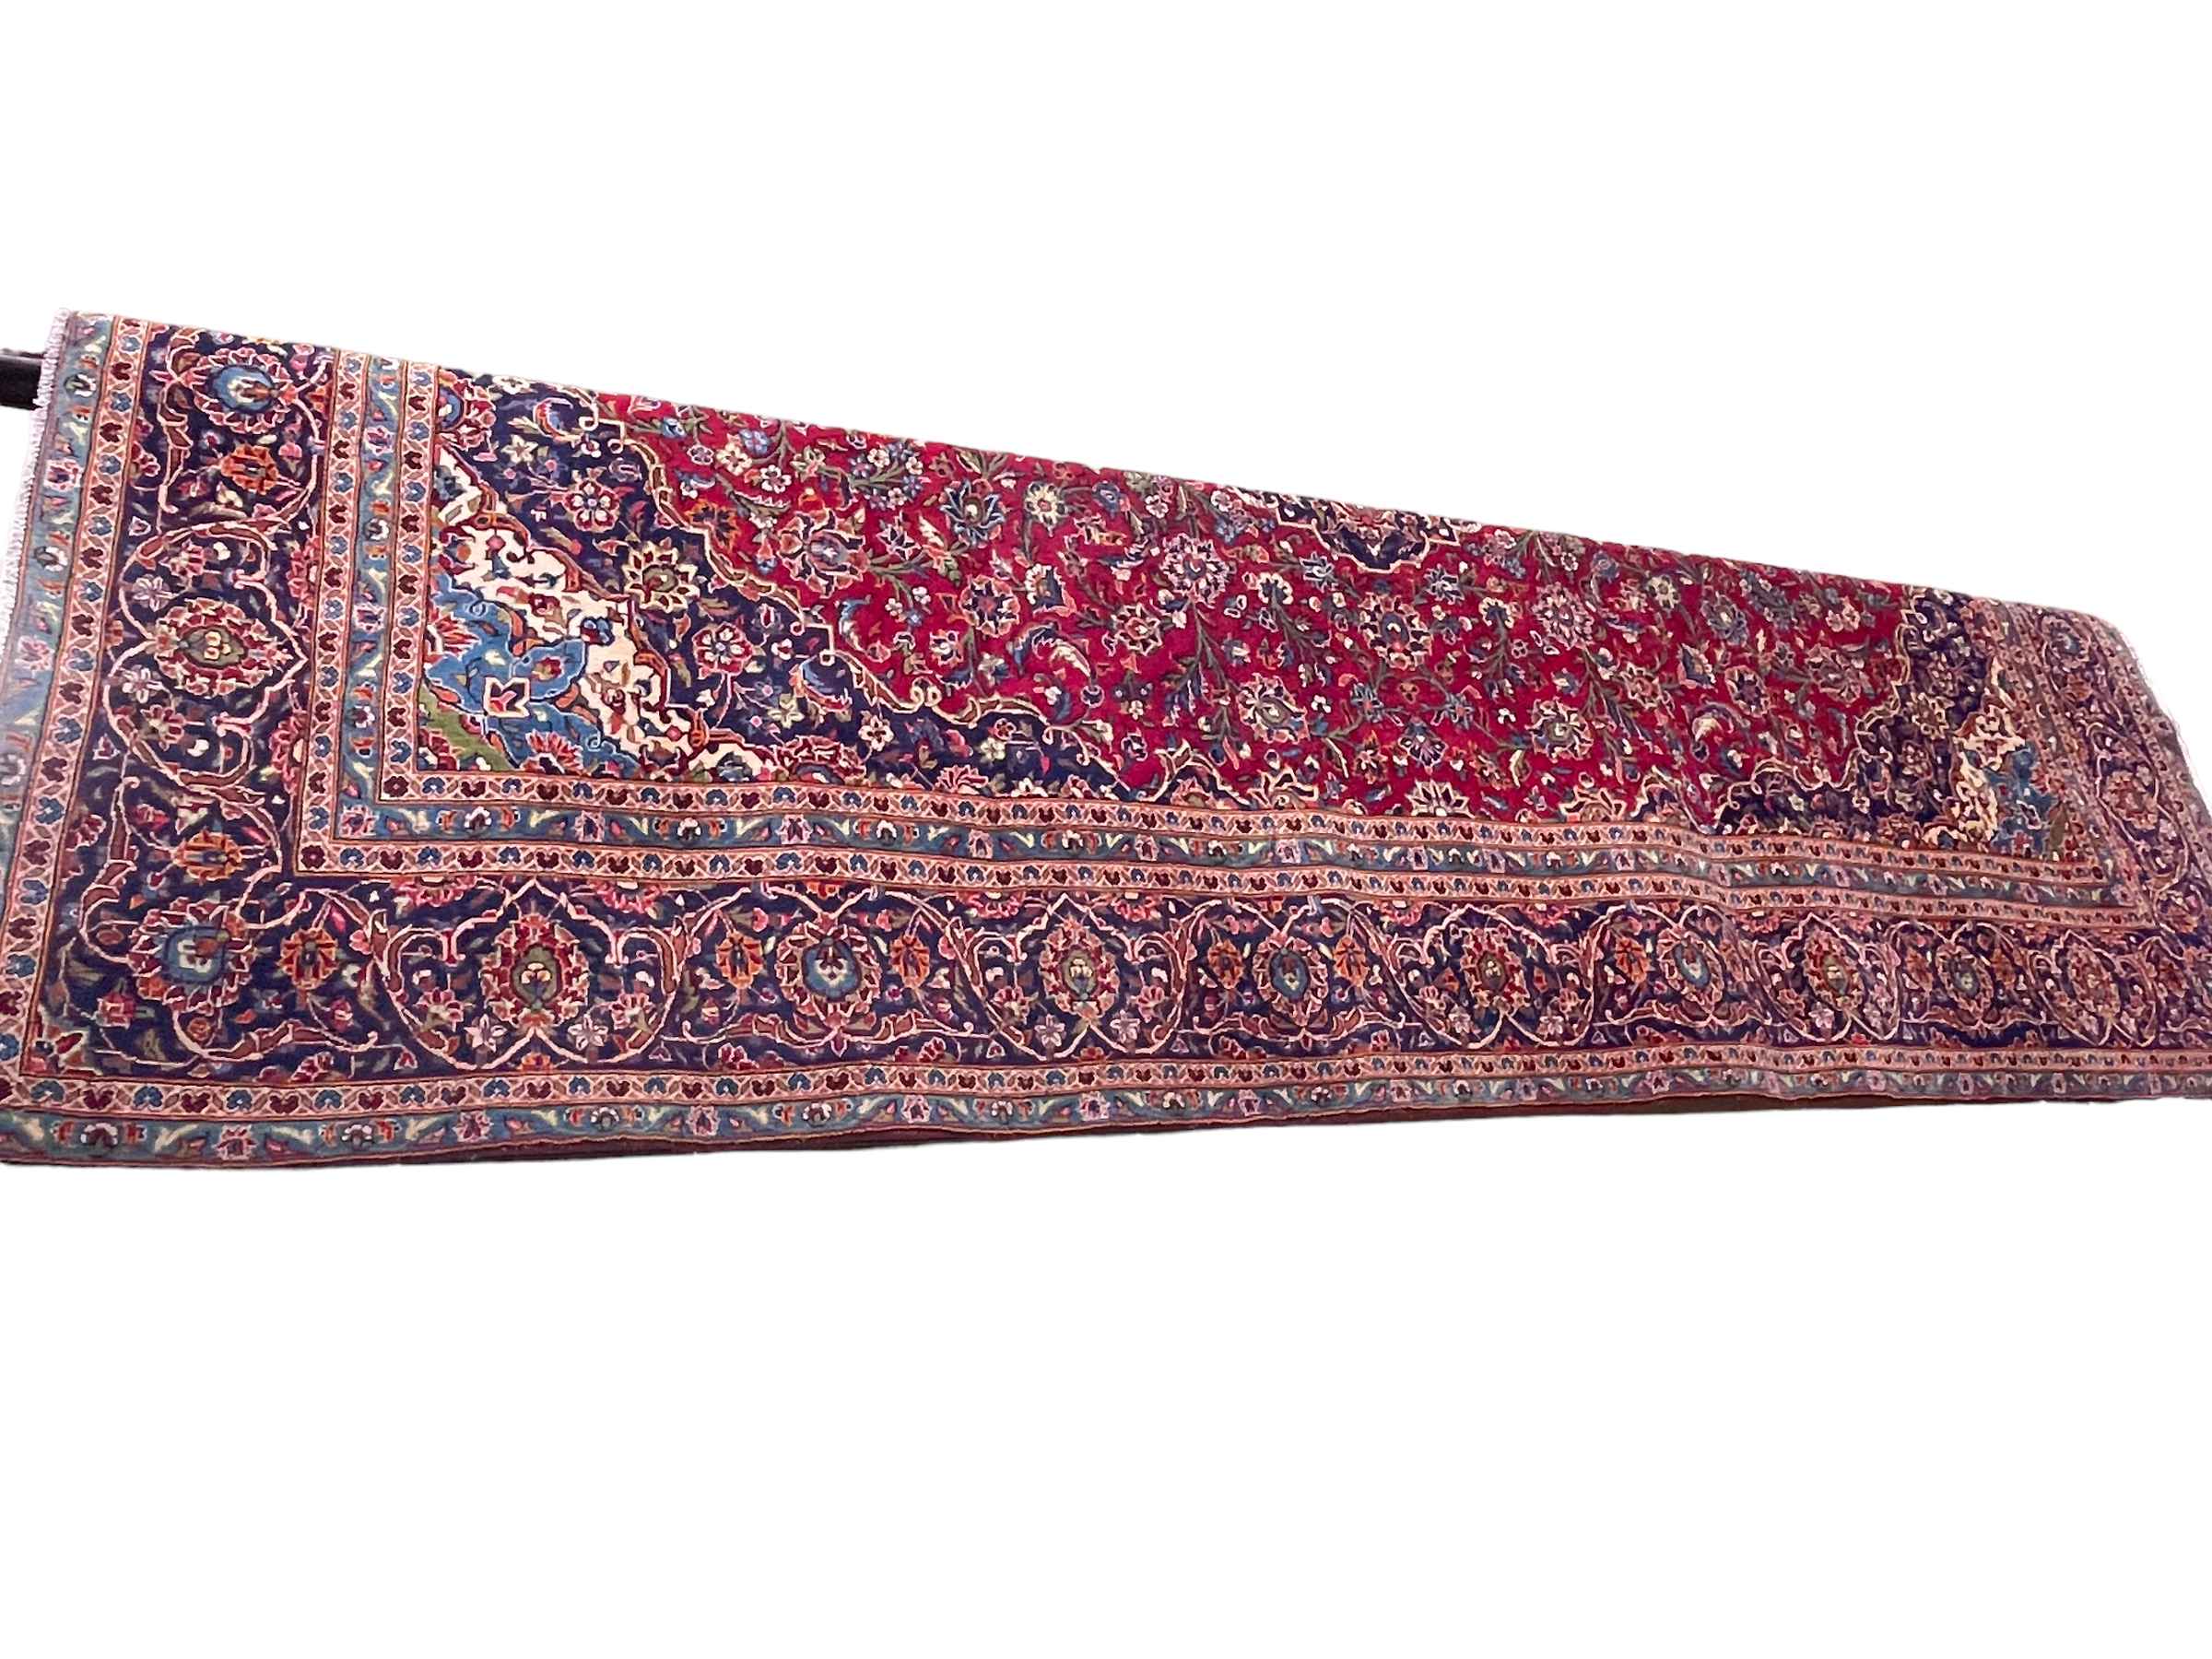 Fine hand knotted Persian Keshan carpet, 4.09 by 2.94.